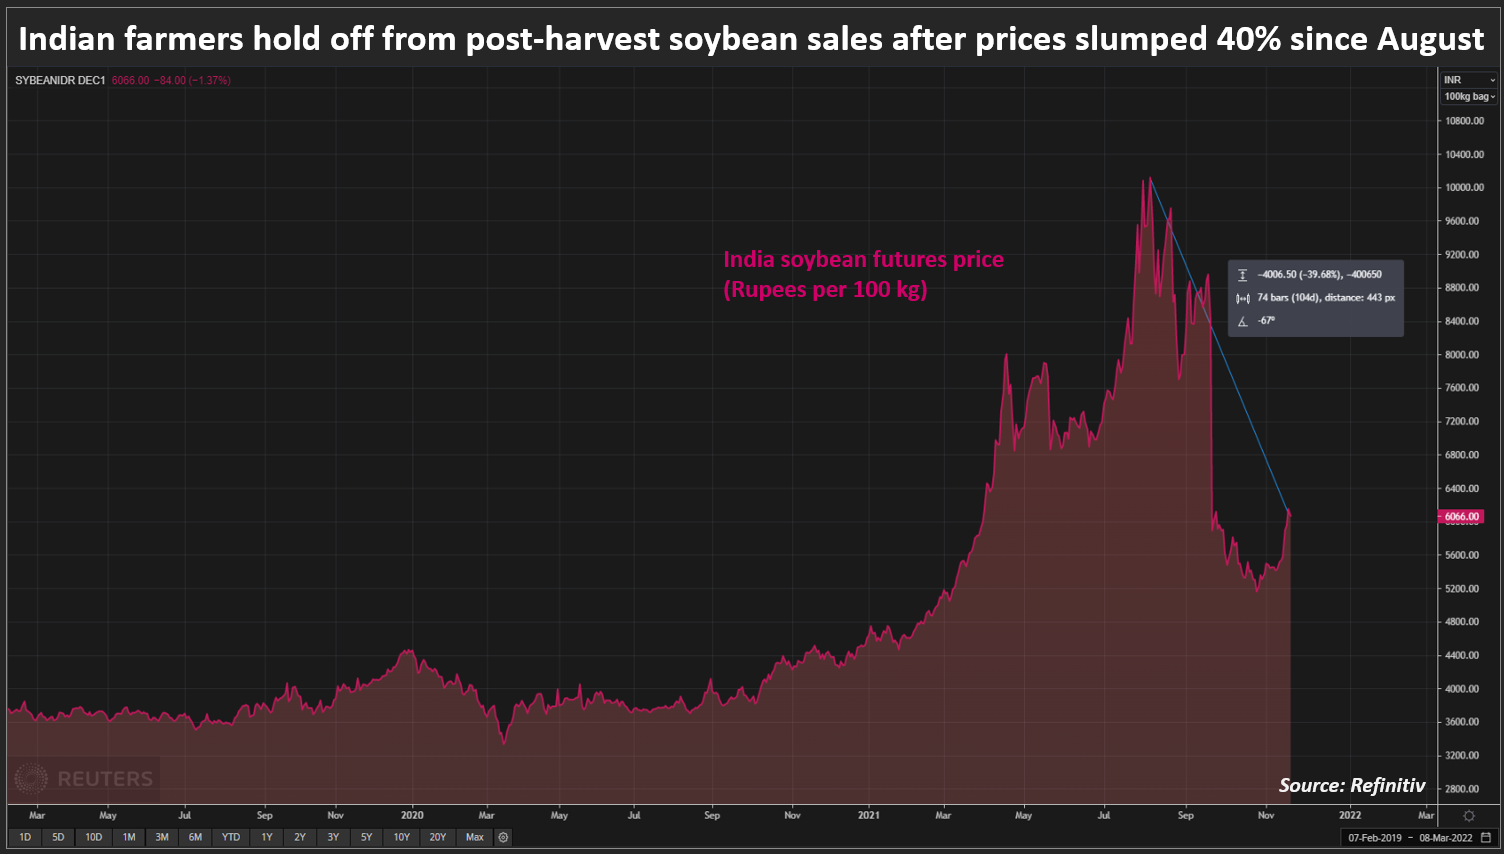 Indian farmers hold off from post-harvest soybean sales after prices slumped 40% since August